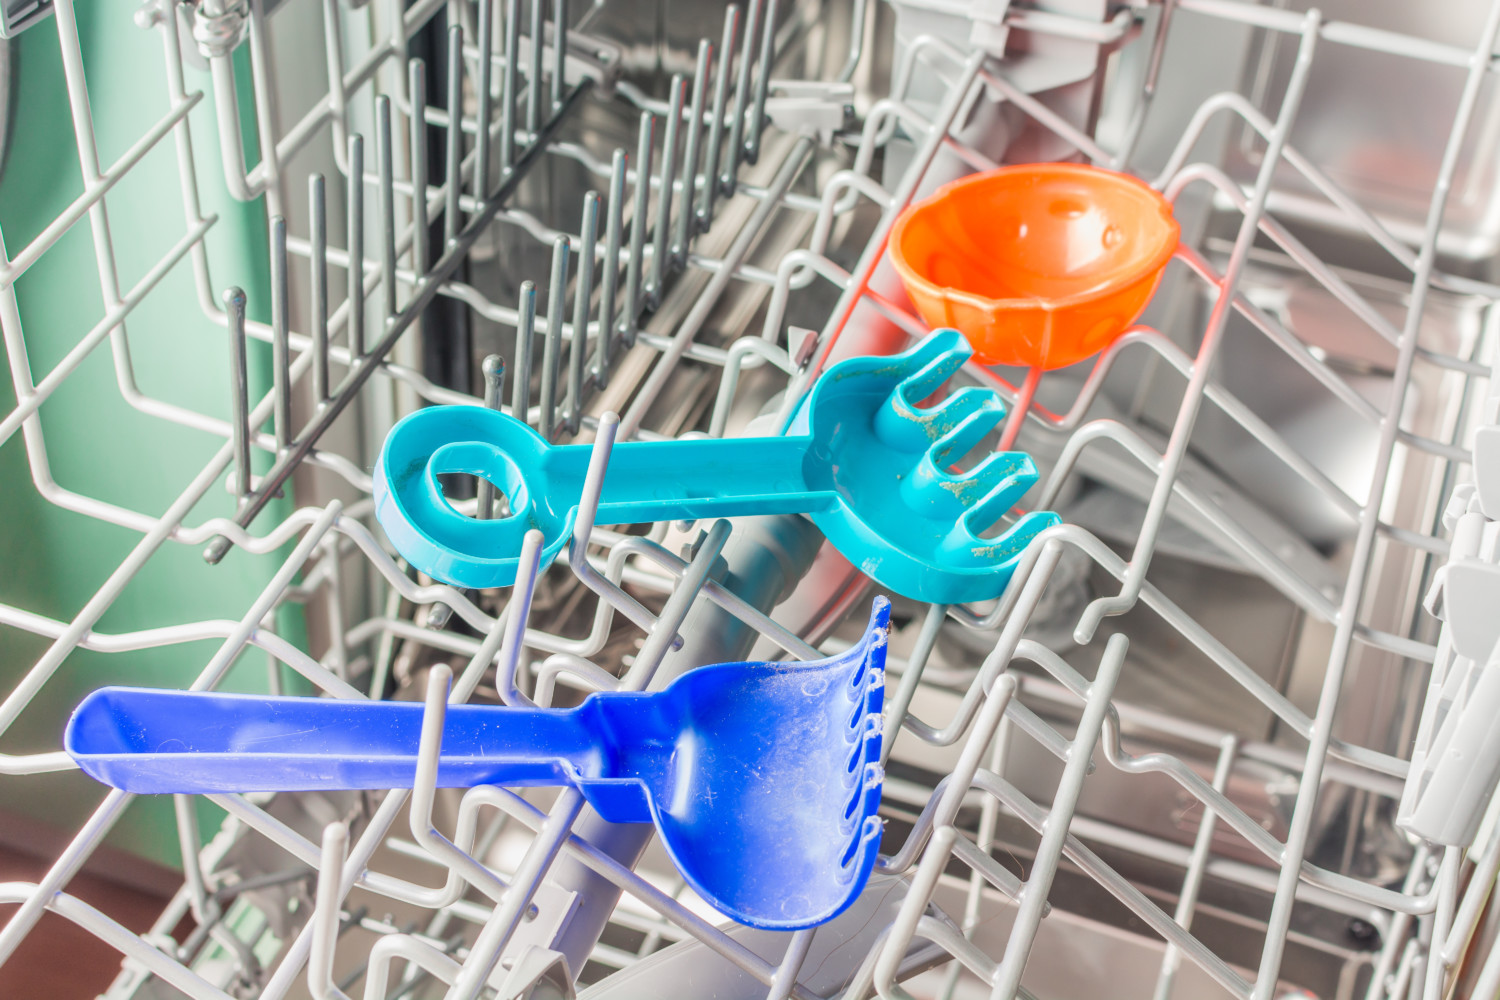 Children's toys in top rack of dishwasher